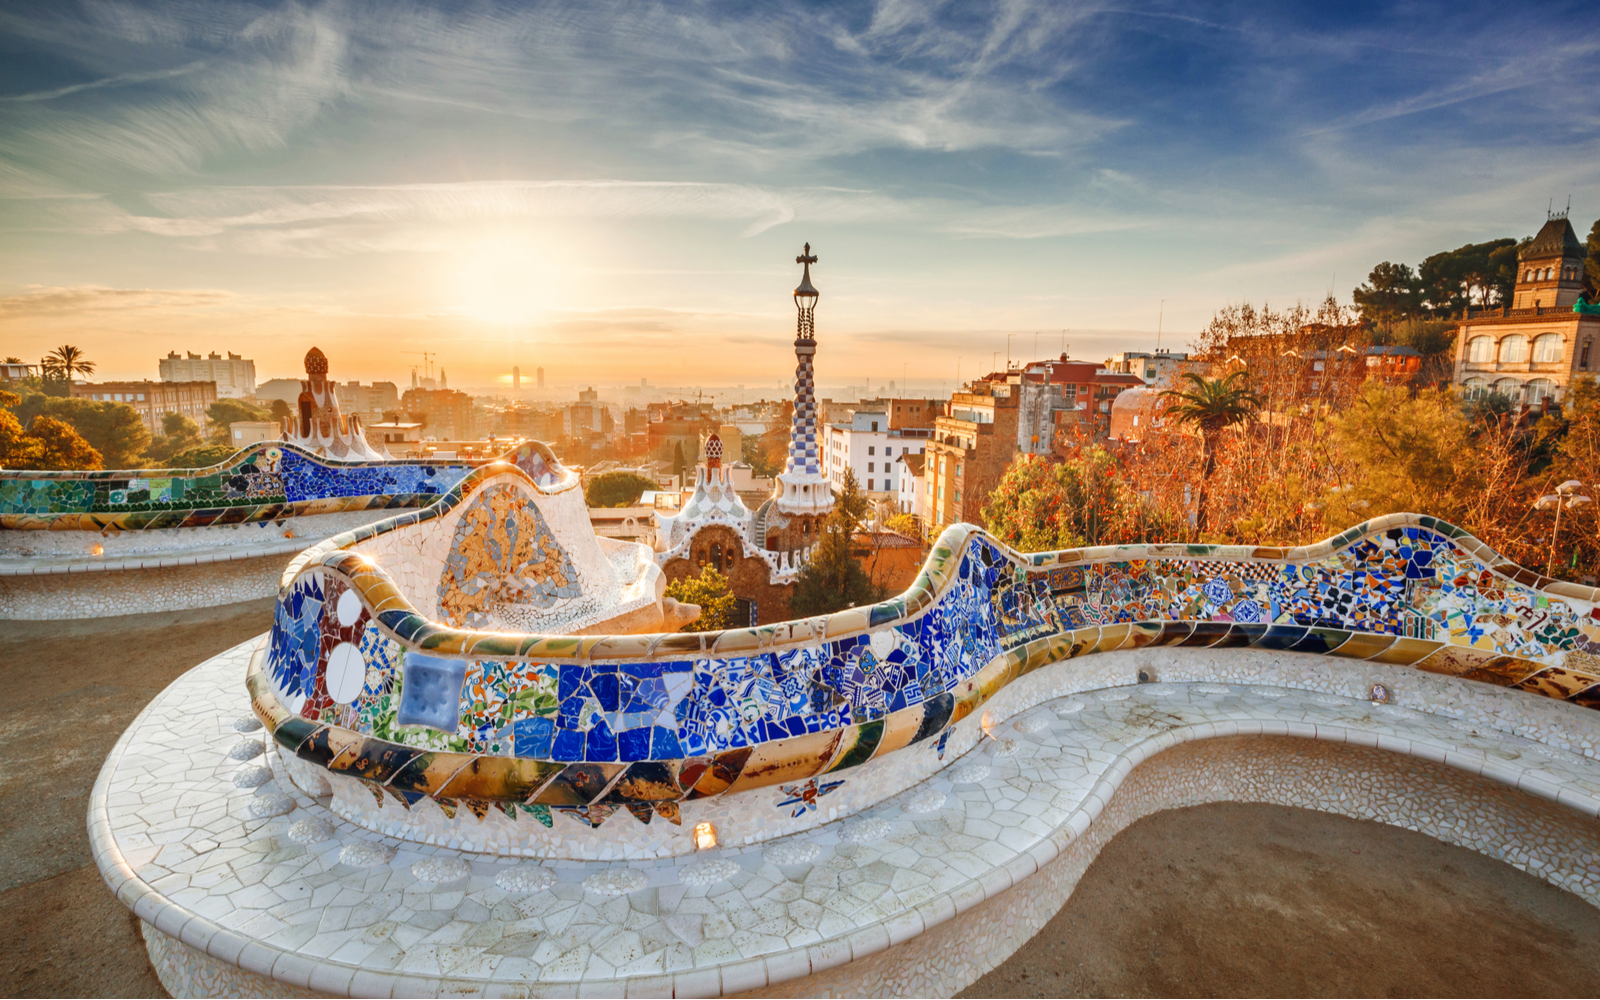 Neat sunset view of the park with mosaics and benches as seen during the best time to visit Barcelona